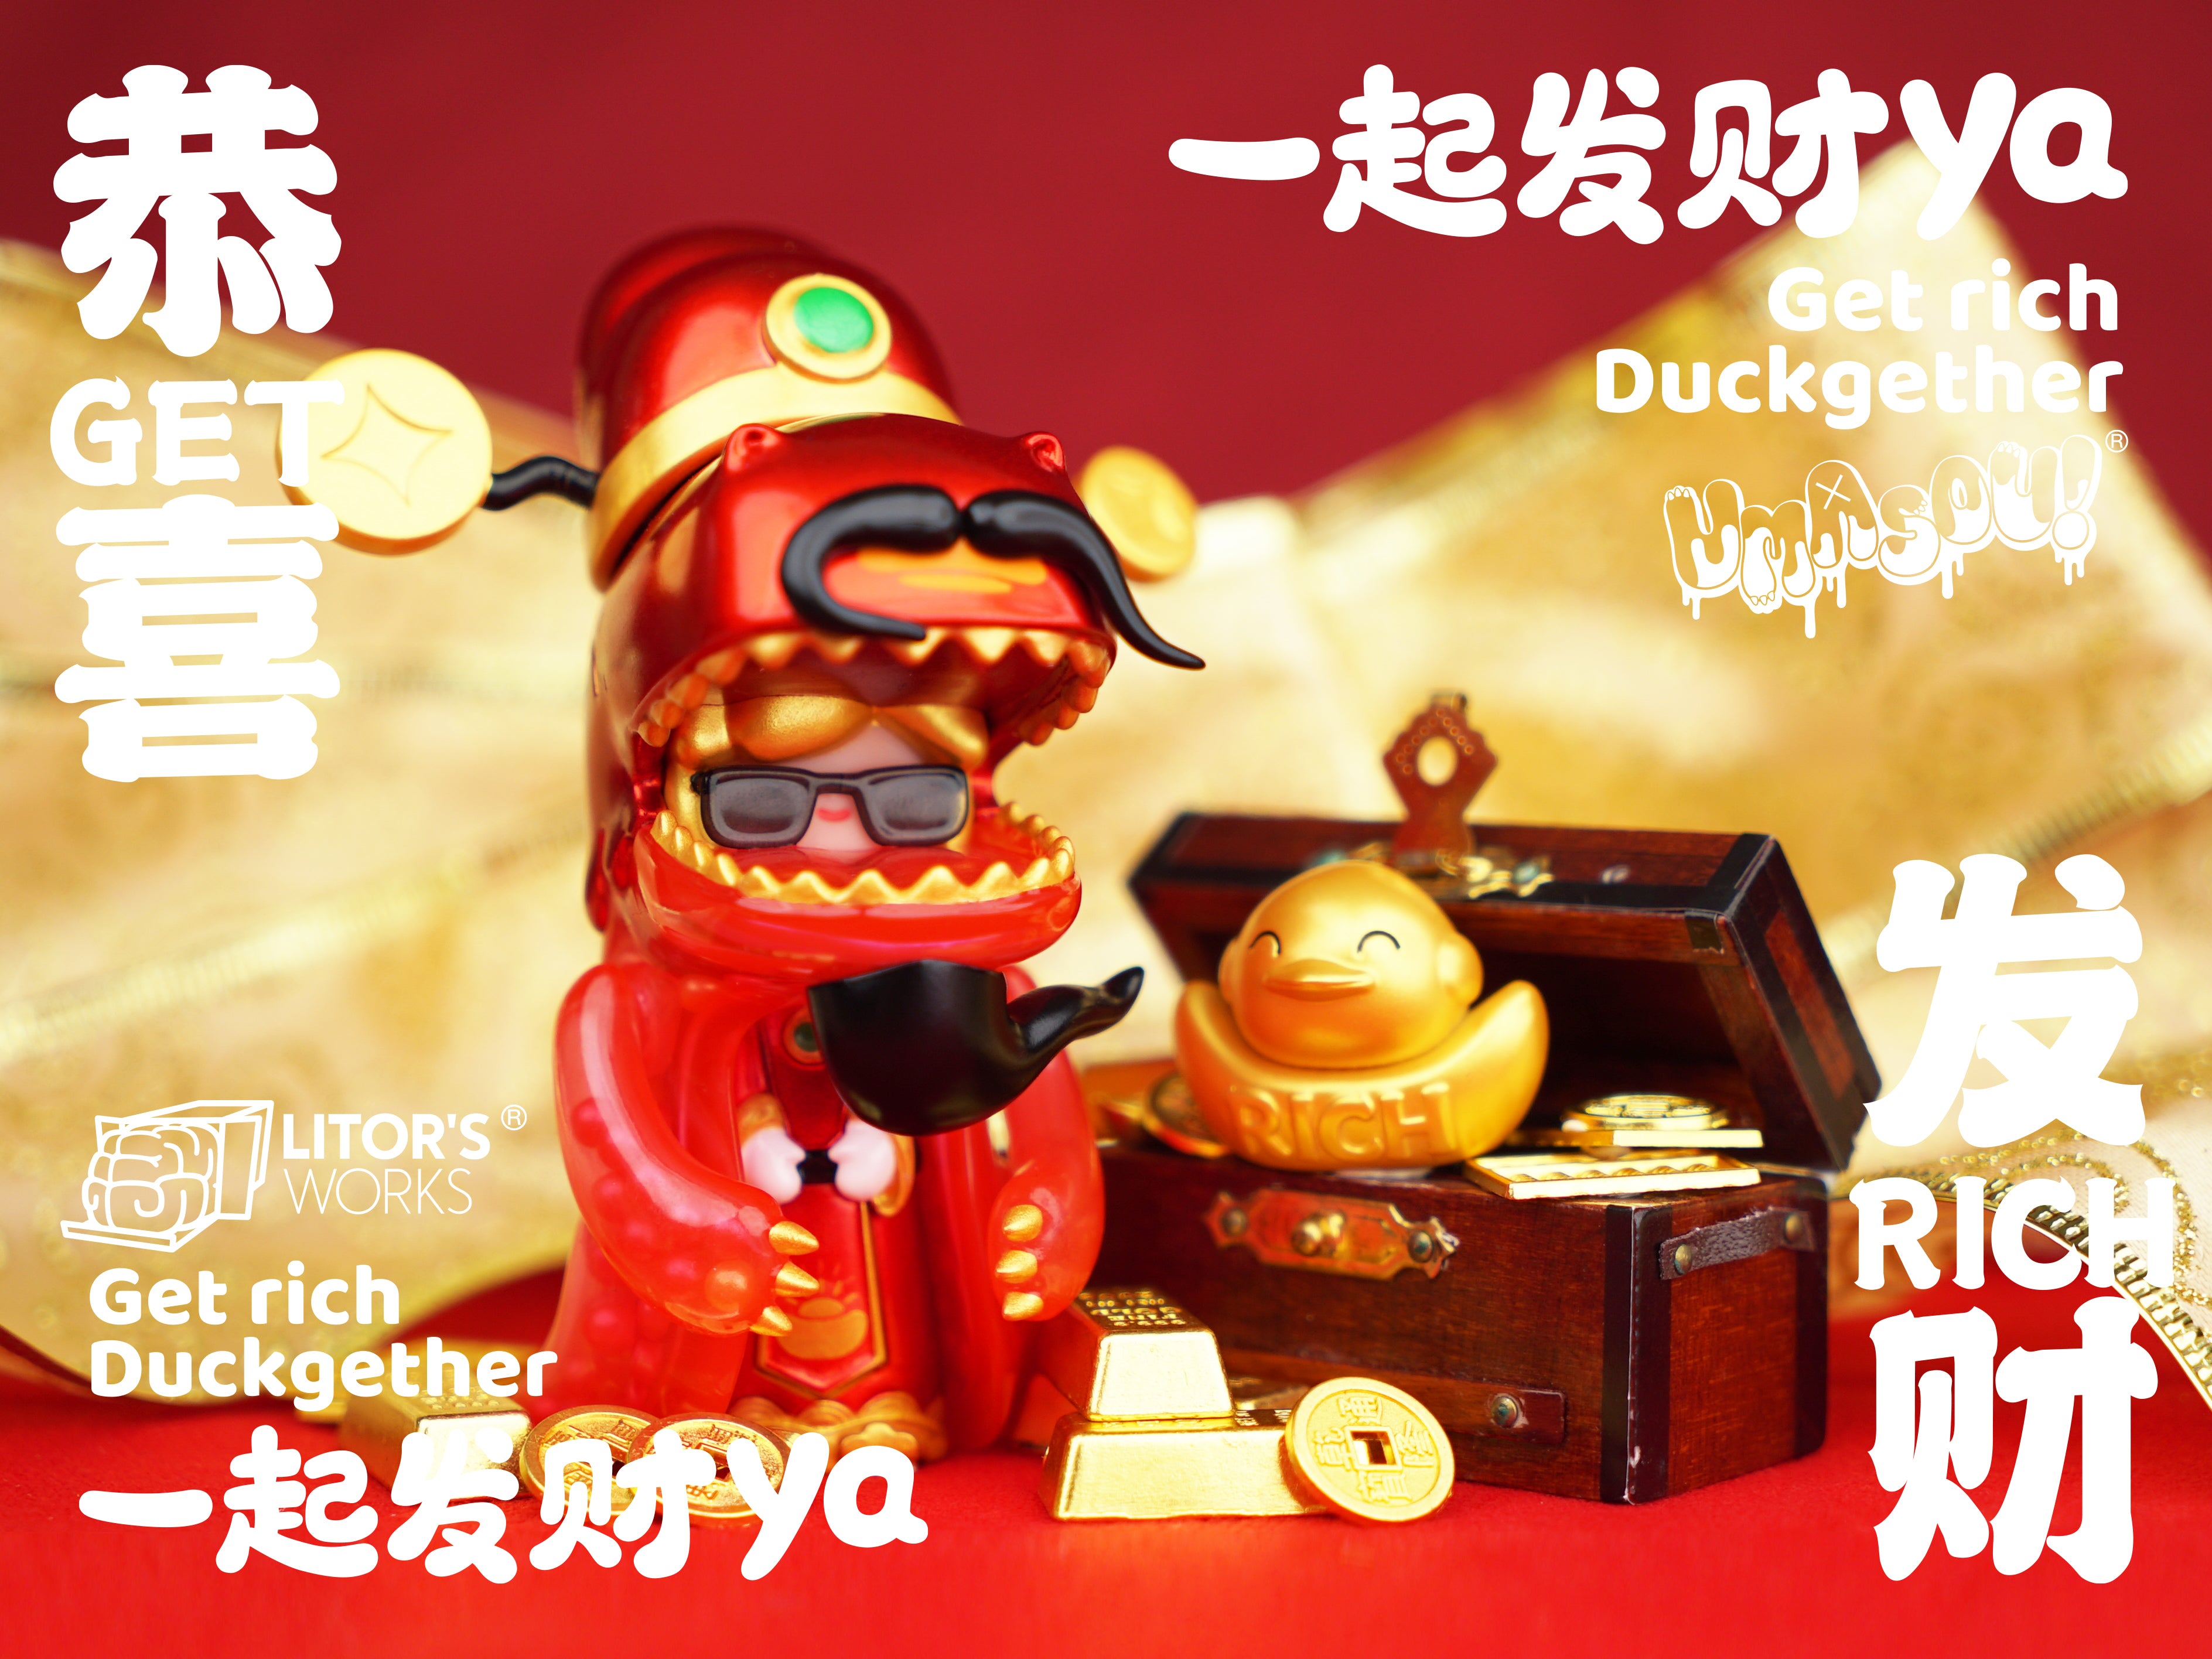 Umasou! Blind Box Working Duckgether by Litor's Works